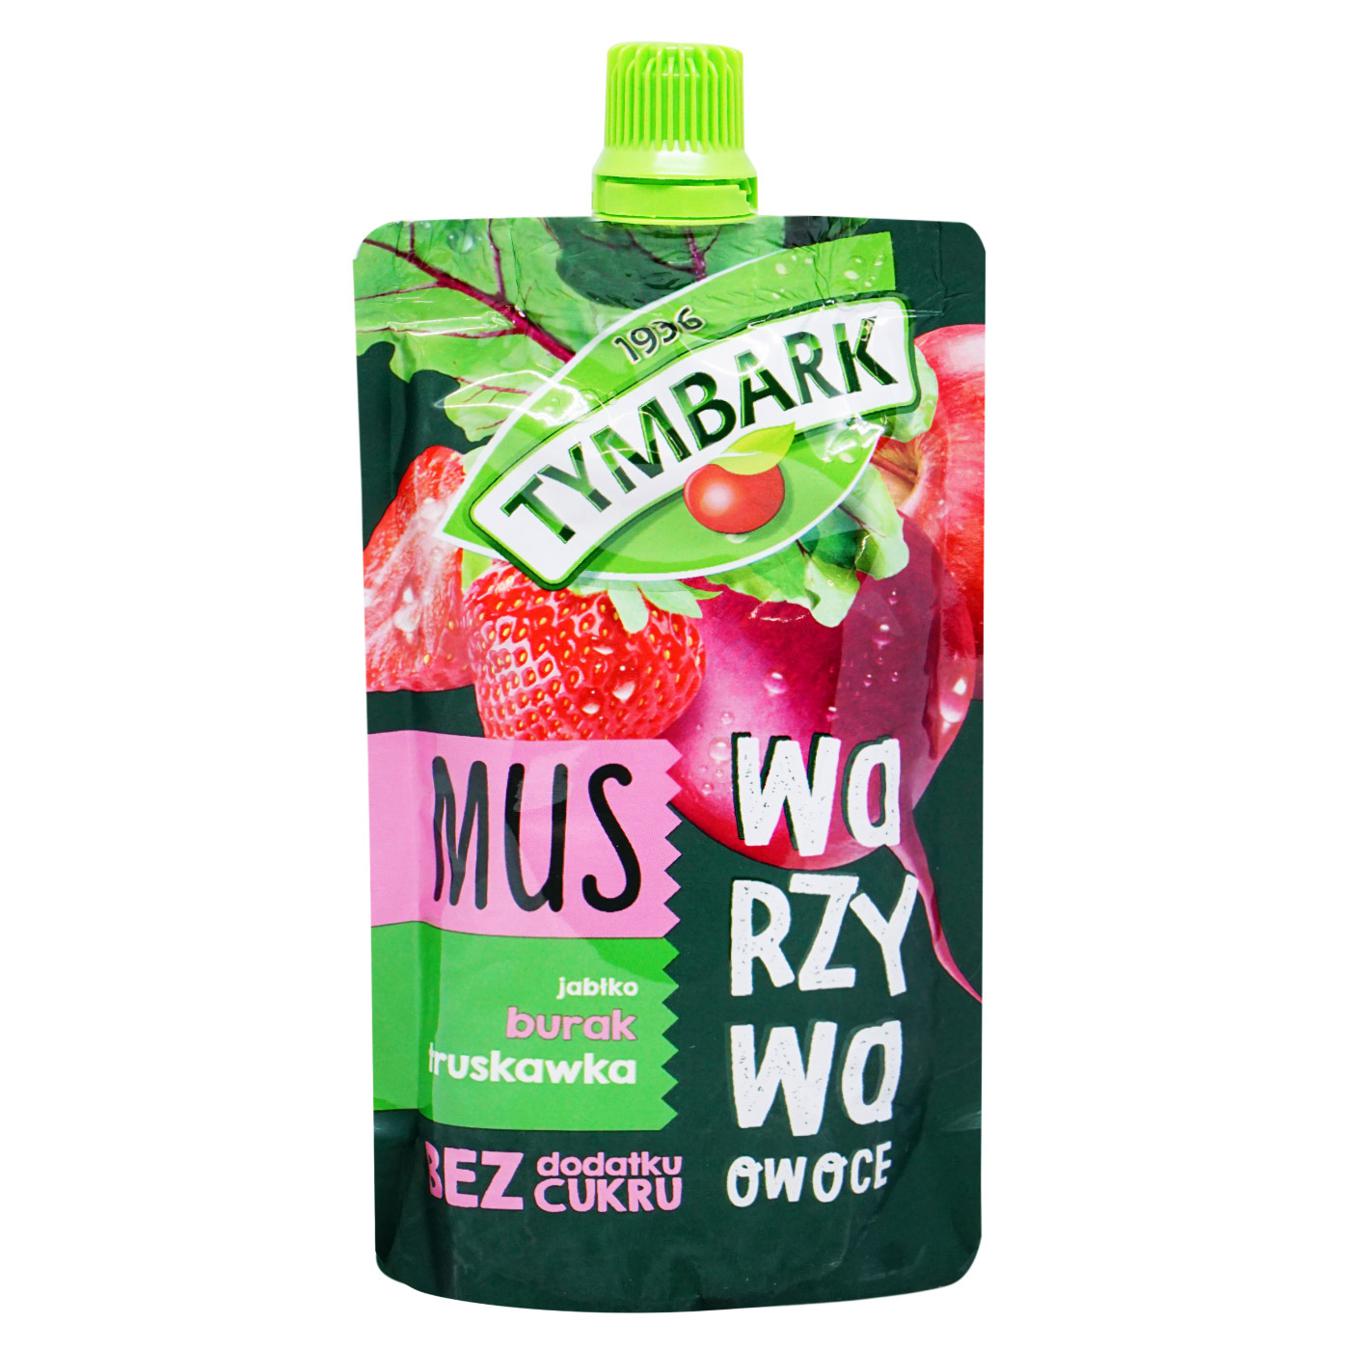 Mousse Tymbark apple beet strawberry 100g